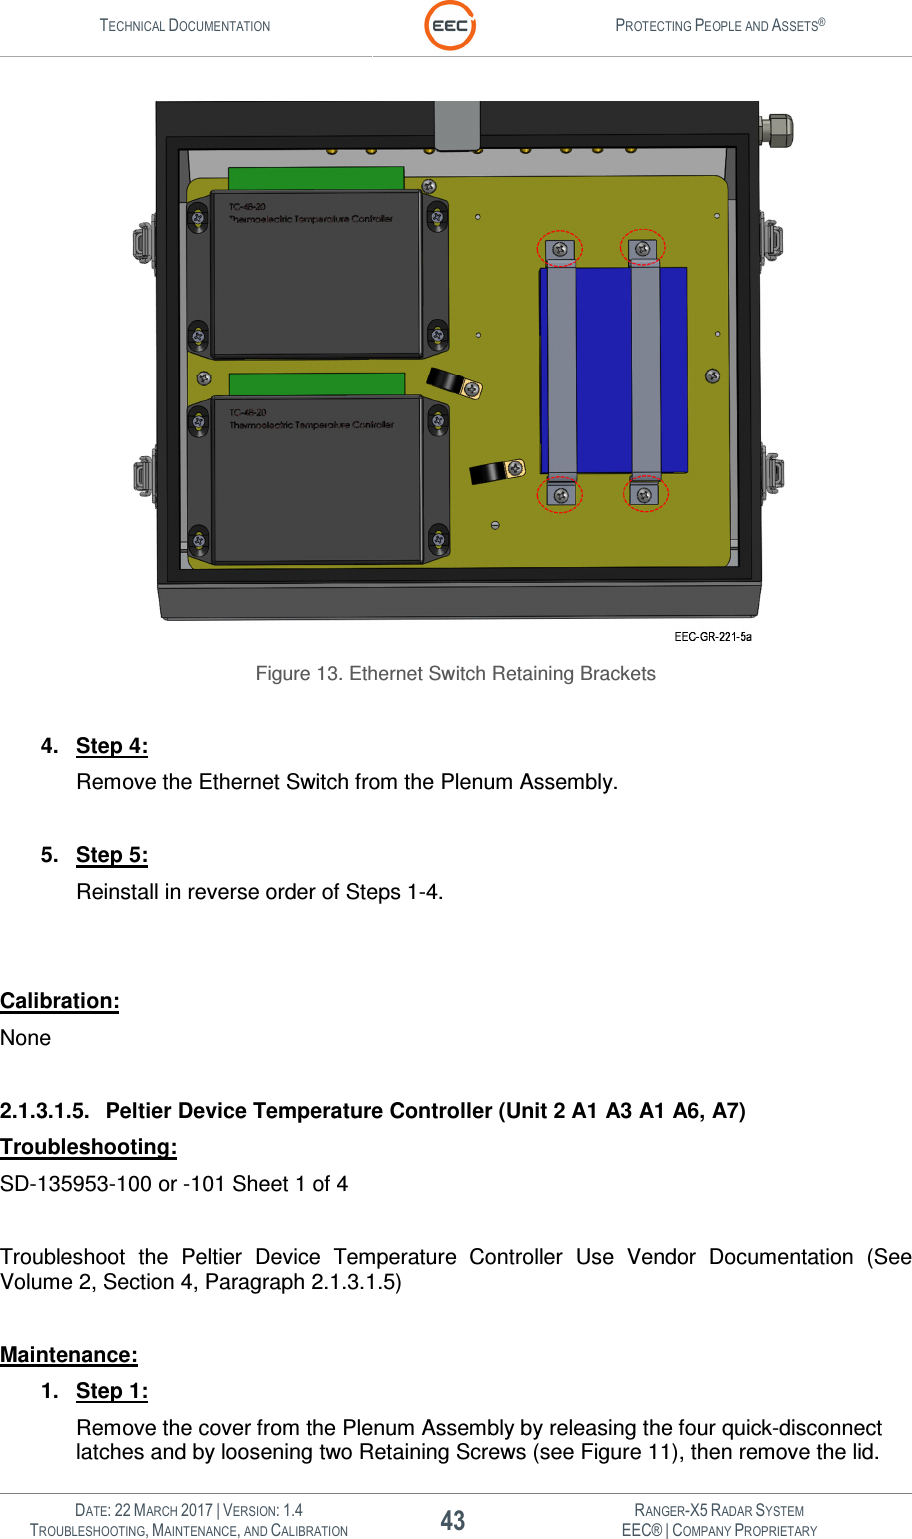 TECHNICAL DOCUMENTATION  PROTECTING PEOPLE AND ASSETS®   DATE: 22 MARCH 2017 | VERSION: 1.4 43 RANGER-X5 RADAR SYSTEM TROUBLESHOOTING, MAINTENANCE, AND CALIBRATION EEC® | COMPANY PROPRIETARY   Figure 13. Ethernet Switch Retaining Brackets  4.  Step 4: Remove the Ethernet Switch from the Plenum Assembly.  5.  Step 5: Reinstall in reverse order of Steps 1-4.   Calibration: None  2.1.3.1.5.  Peltier Device Temperature Controller (Unit 2 A1 A3 A1 A6, A7) Troubleshooting: SD-135953-100 or -101 Sheet 1 of 4  Troubleshoot  the  Peltier  Device  Temperature  Controller  Use  Vendor  Documentation  (See Volume 2, Section 4, Paragraph 2.1.3.1.5)  Maintenance: 1.  Step 1: Remove the cover from the Plenum Assembly by releasing the four quick-disconnect latches and by loosening two Retaining Screws (see Figure 11), then remove the lid. 